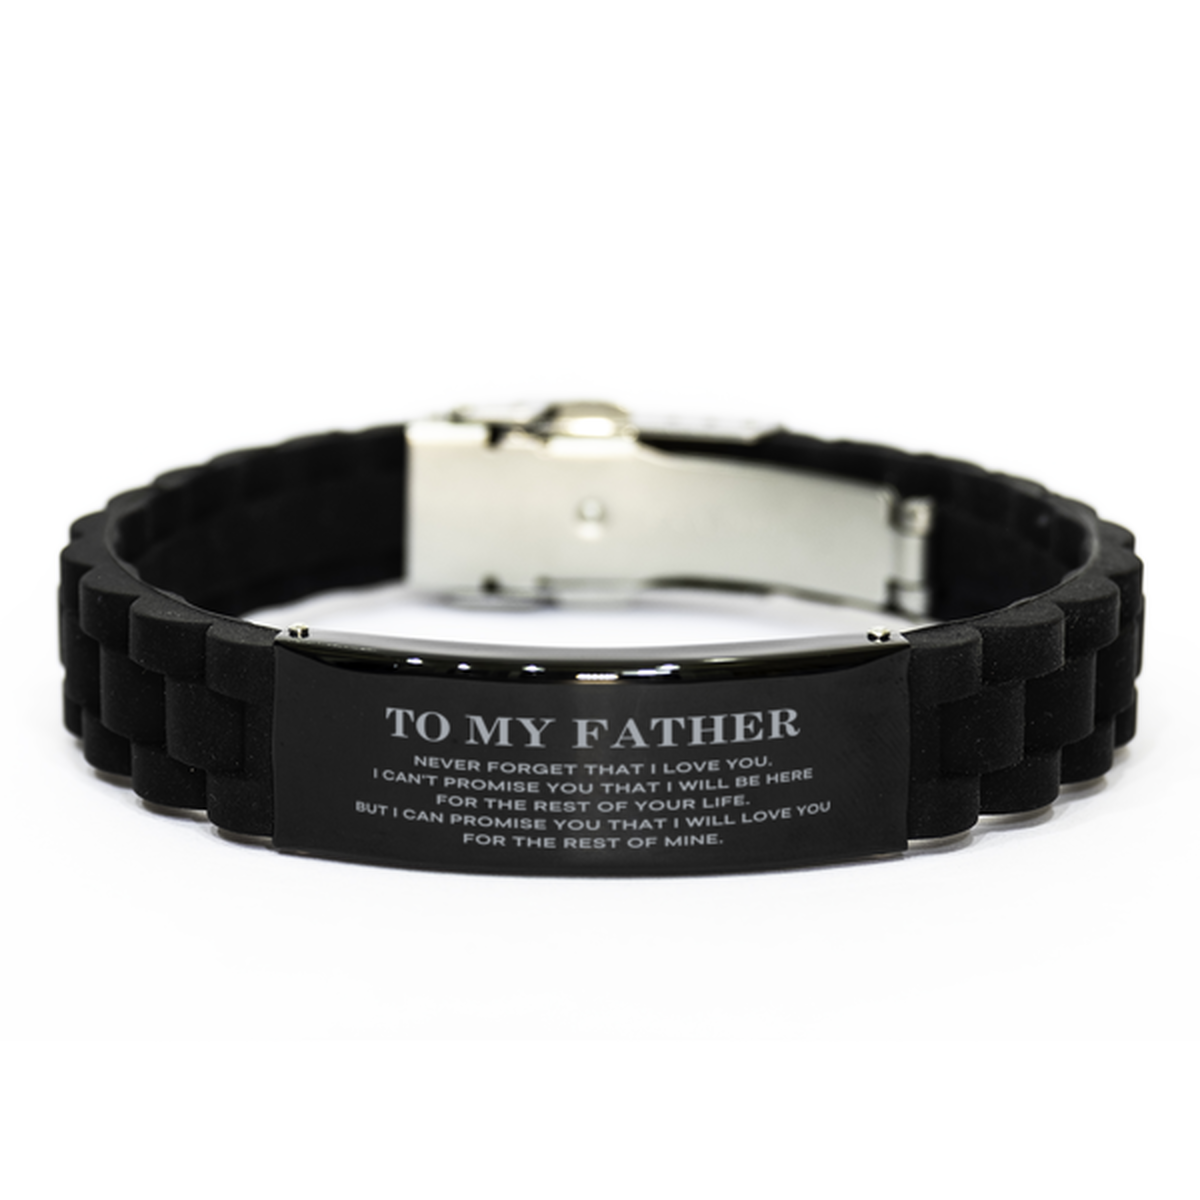 To My Father Gifts, I will love you for the rest of mine, Love Father Bracelet, Birthday Christmas Unique Black Glidelock Clasp Bracelet For Father